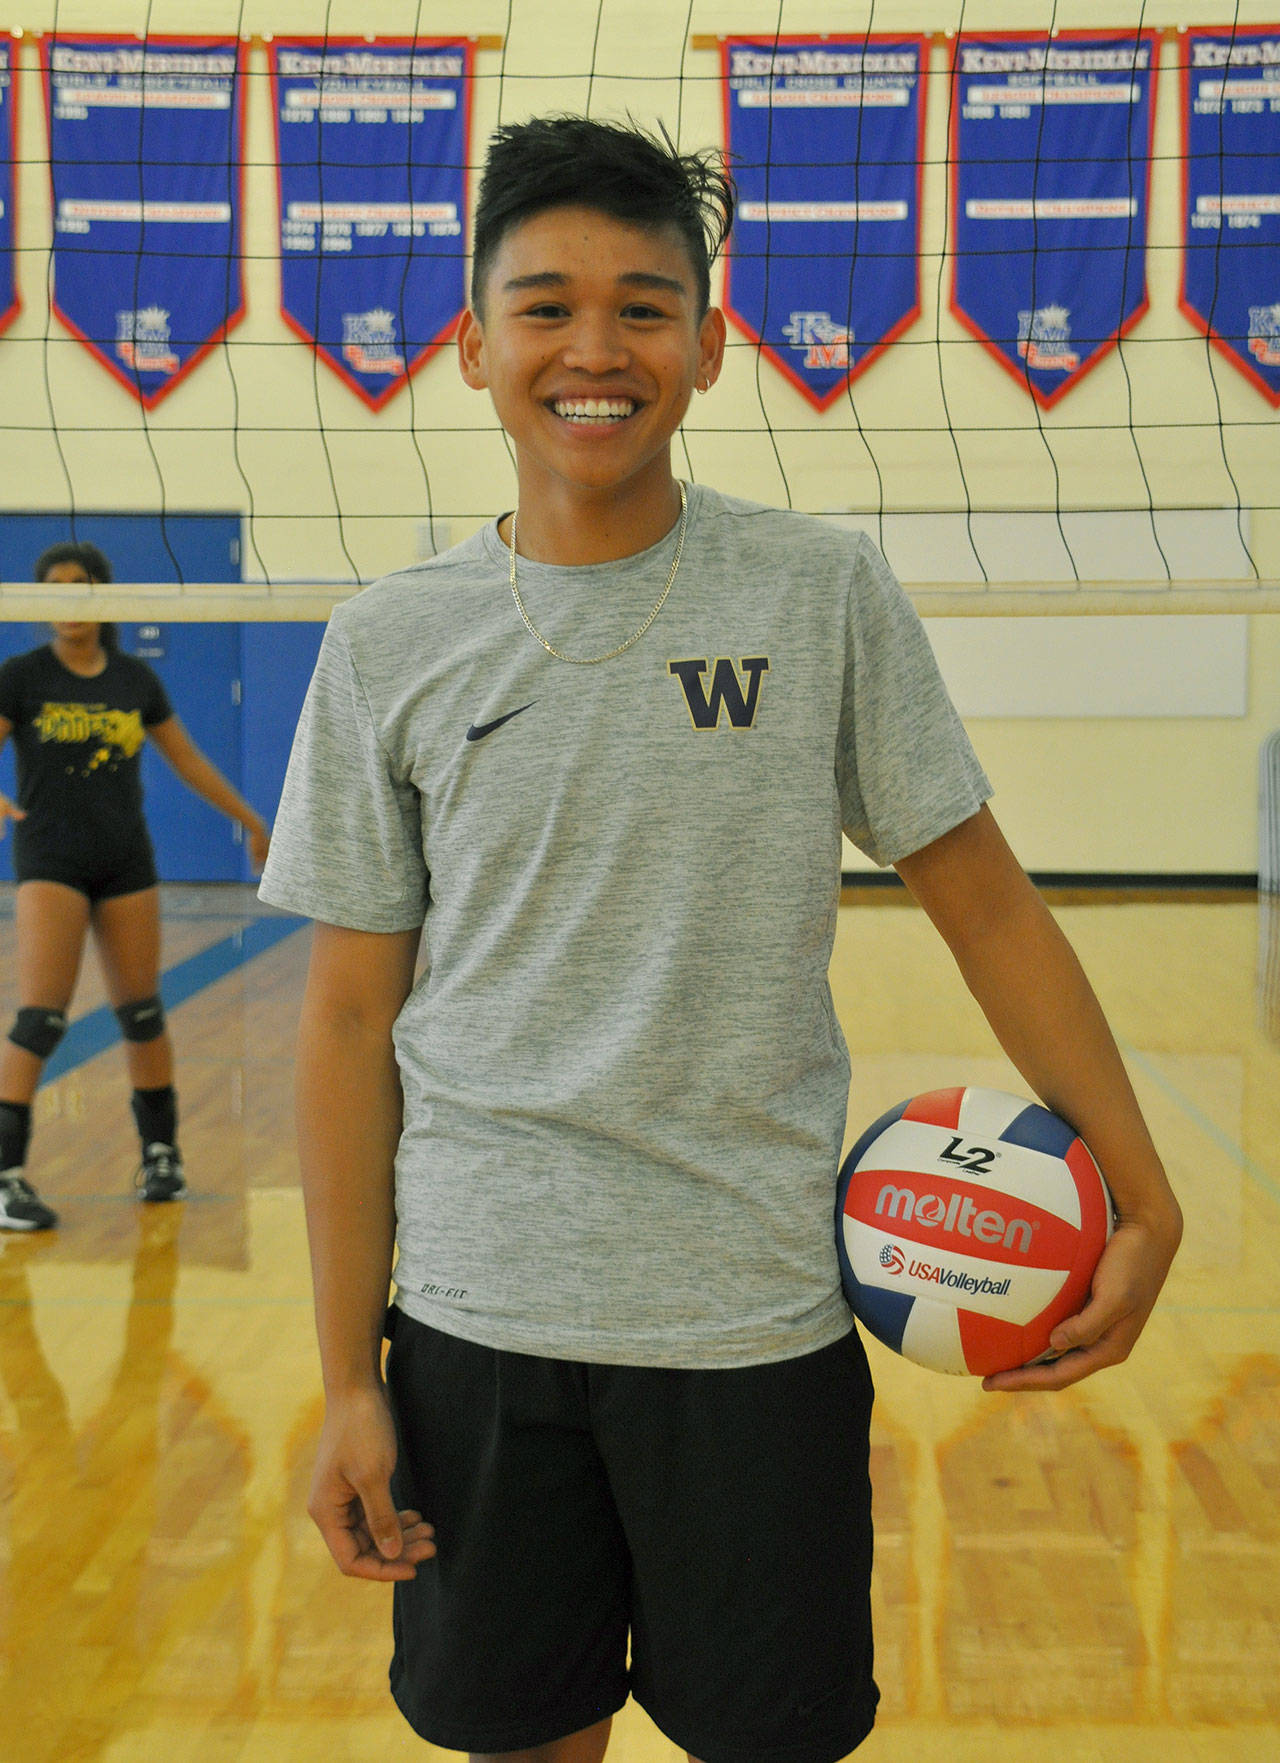 Jared Caberto is small in stature but big on his drive to play and learn more about volleyball. The manager of the Kent-Meridian team, who practices with the girls, would like to coach the sport one day. HEIDI SANDERS, Kent Reporter